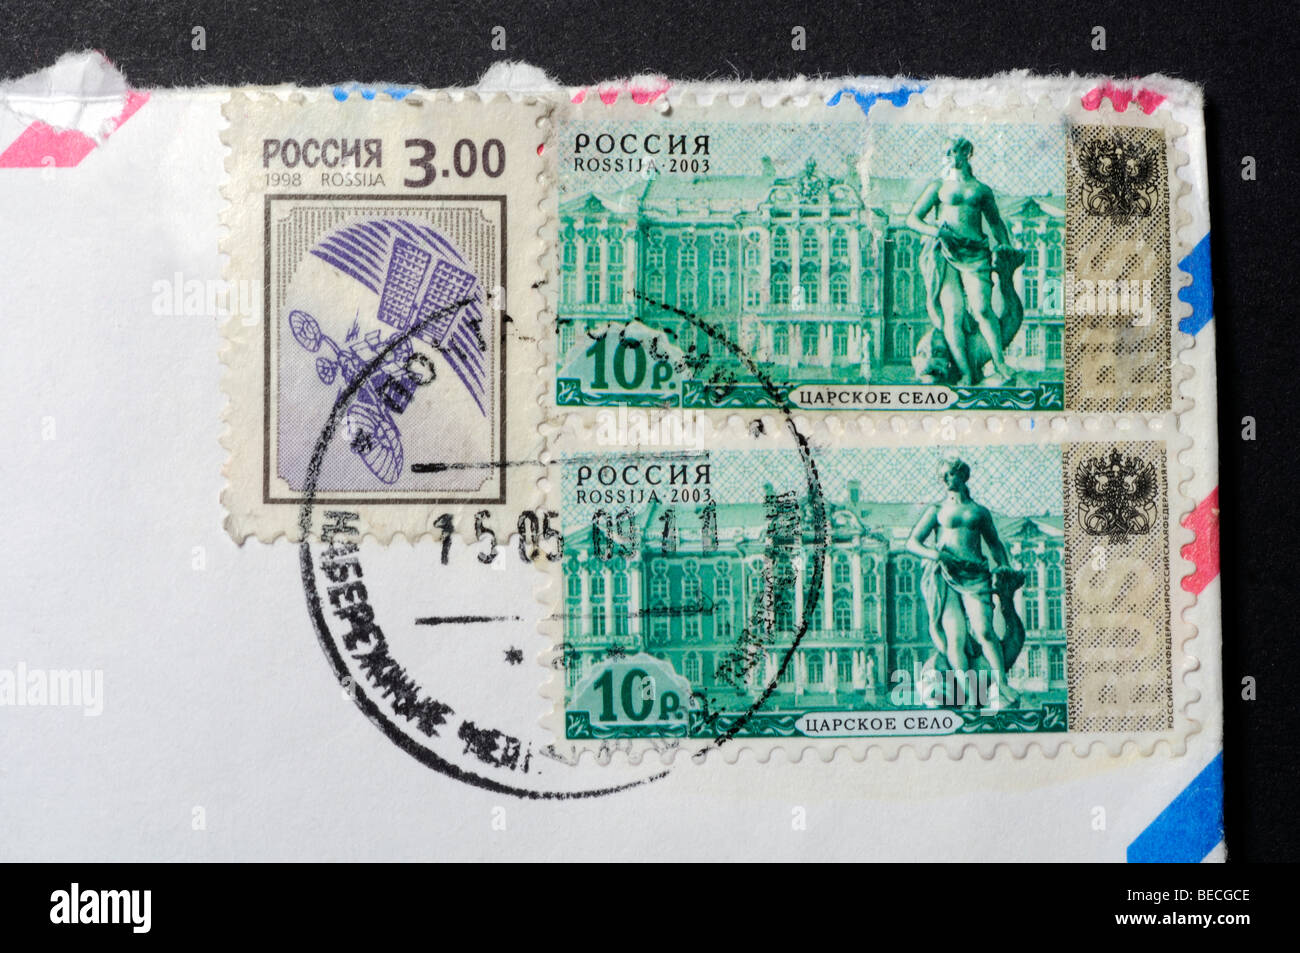 Russia postage stamp Stock Photo